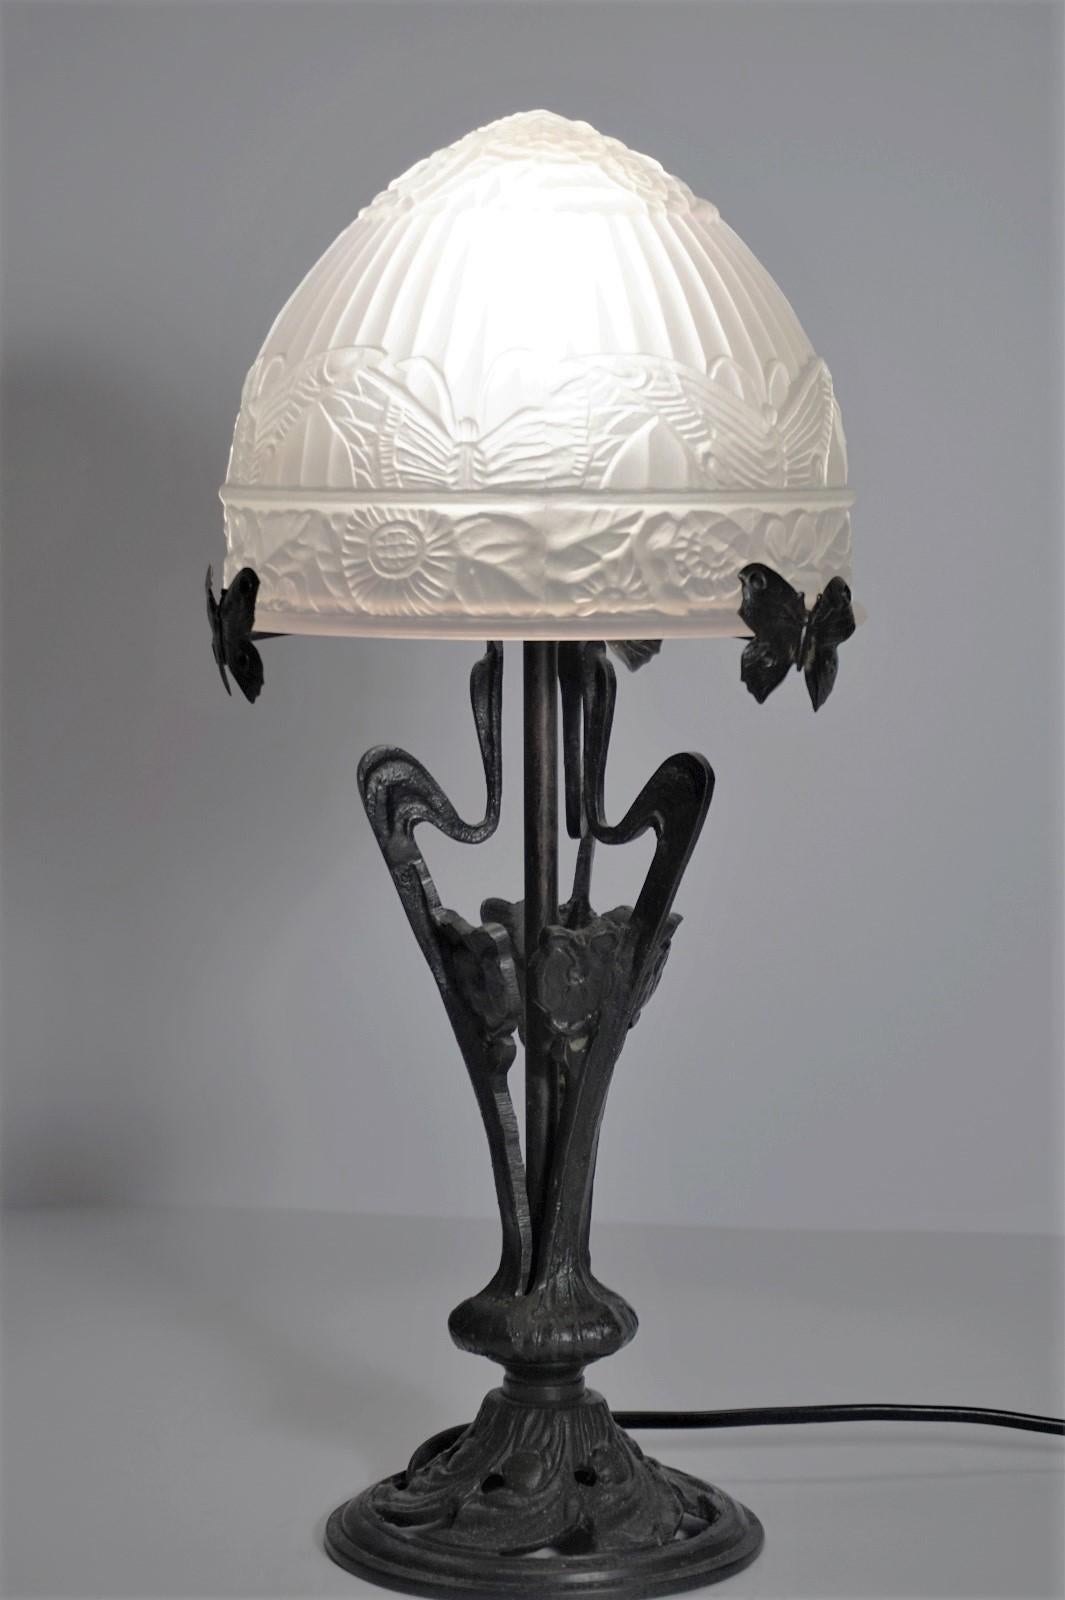 A lovely Art Deco table lamp of wrought iron with black finish with beautiful frosted art glass shade with over flowing floral and butterfly motif, France circa 1930-1939.
It takes one E14 light bulb up to 60W
Measures:
Height 16 in (40.5